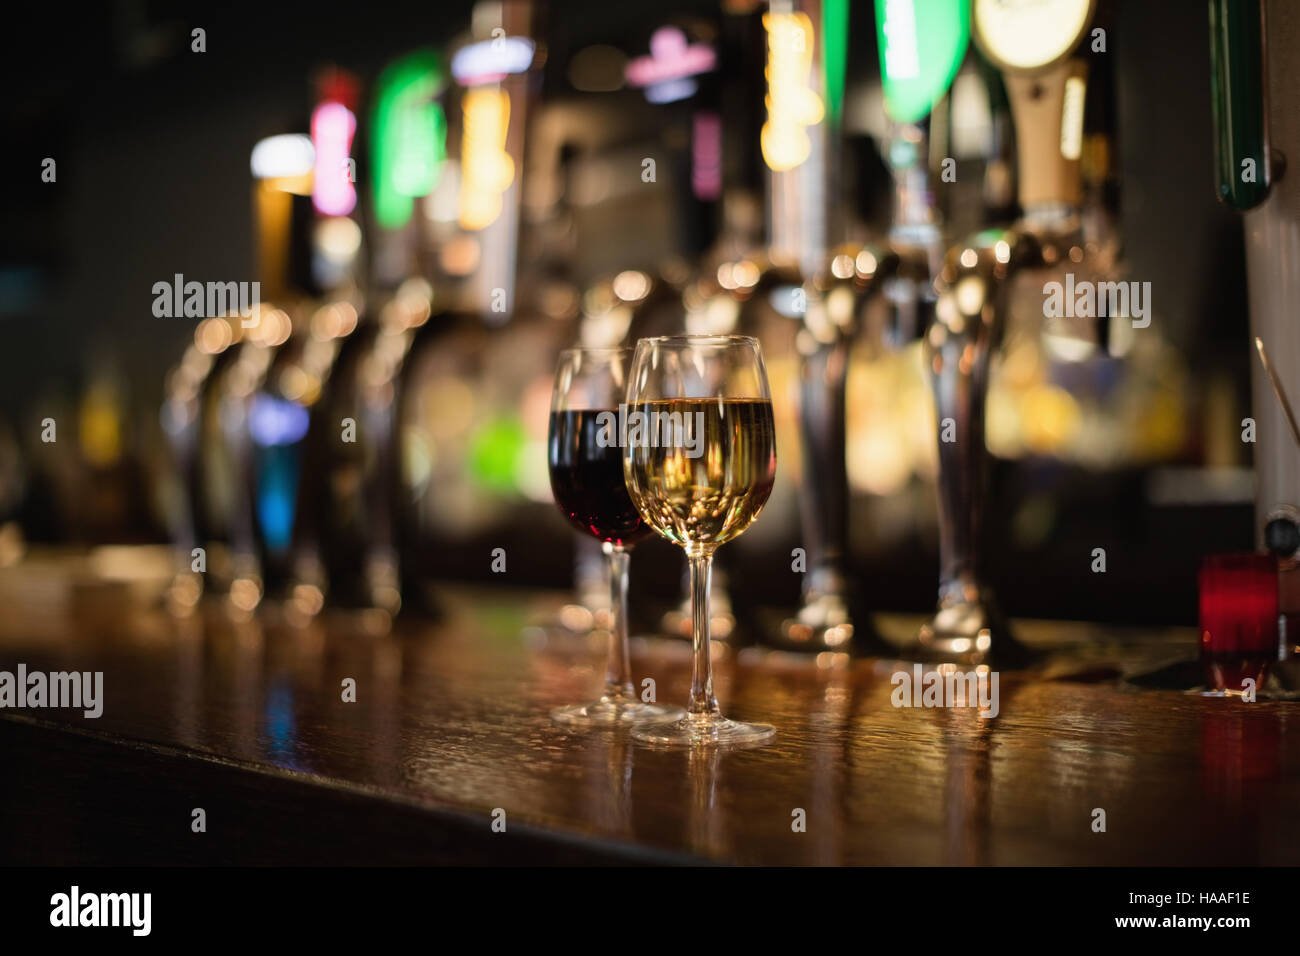 Two glass of red wine on bar counter Stock Photo